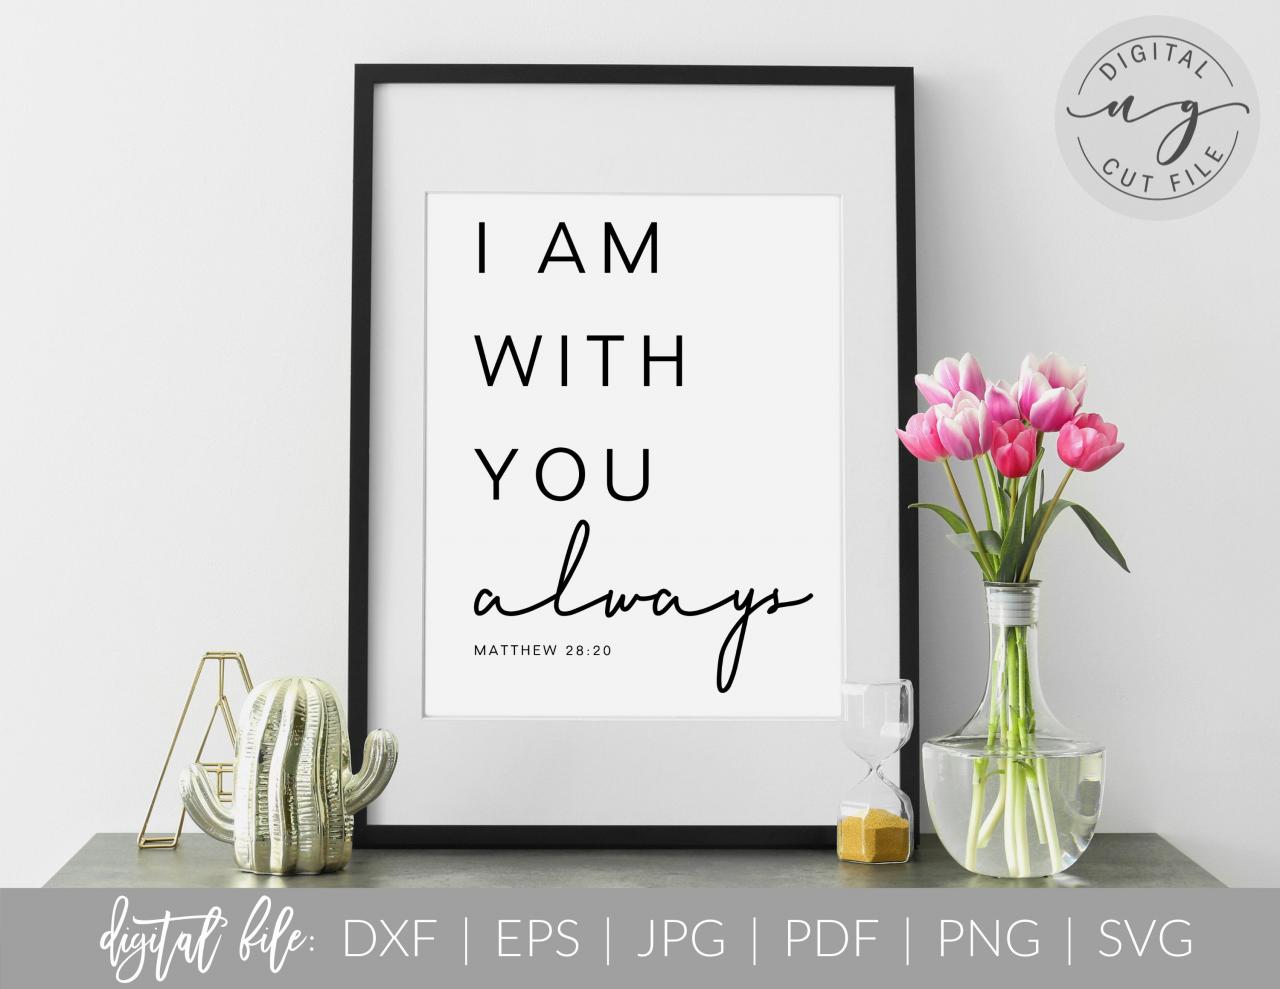 I Am With You Always | Bible Verse Quote | Svg, Dxf Cut File | Pdf Print File | Cricut Cameo Silhouette | Png Clipart | Instant Download